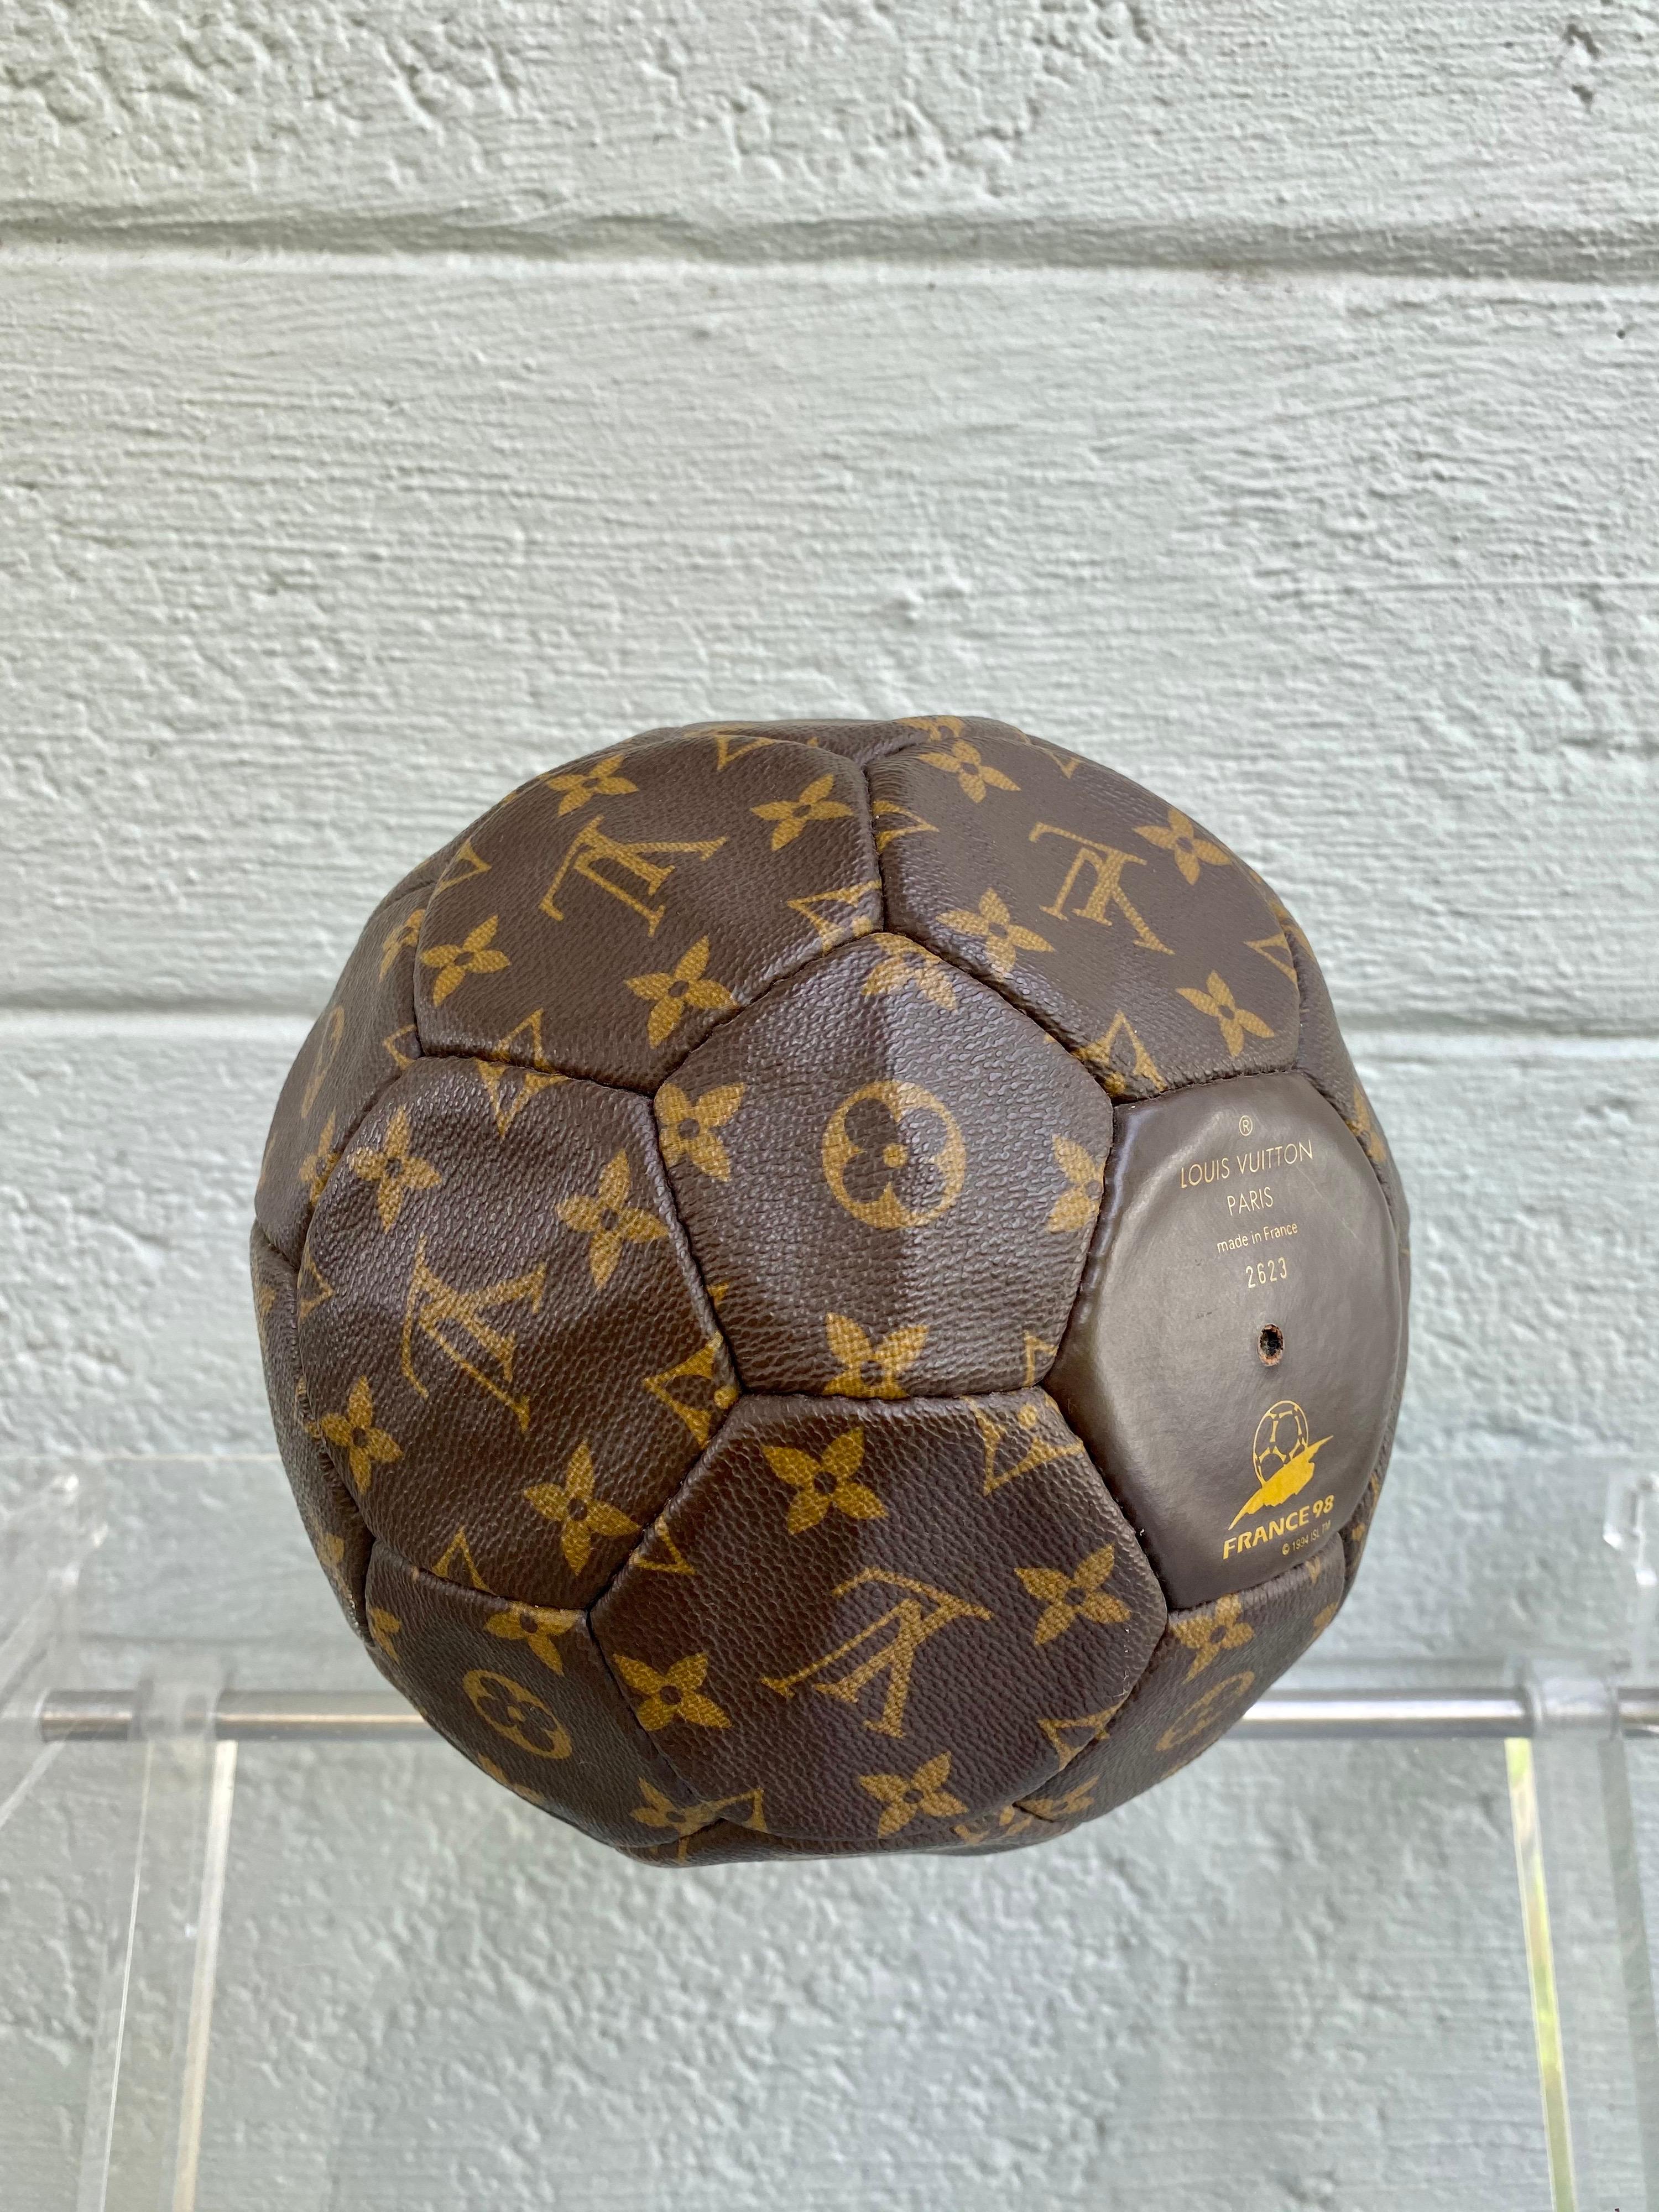 Louis Vuitton soccer ball made for the World cup in France in 1998 in a limited edition about 3000 pieces, as present for artists, celebrities and politicians. Great collectible or decorative item. The limited Edition Number of the ball is 2623.